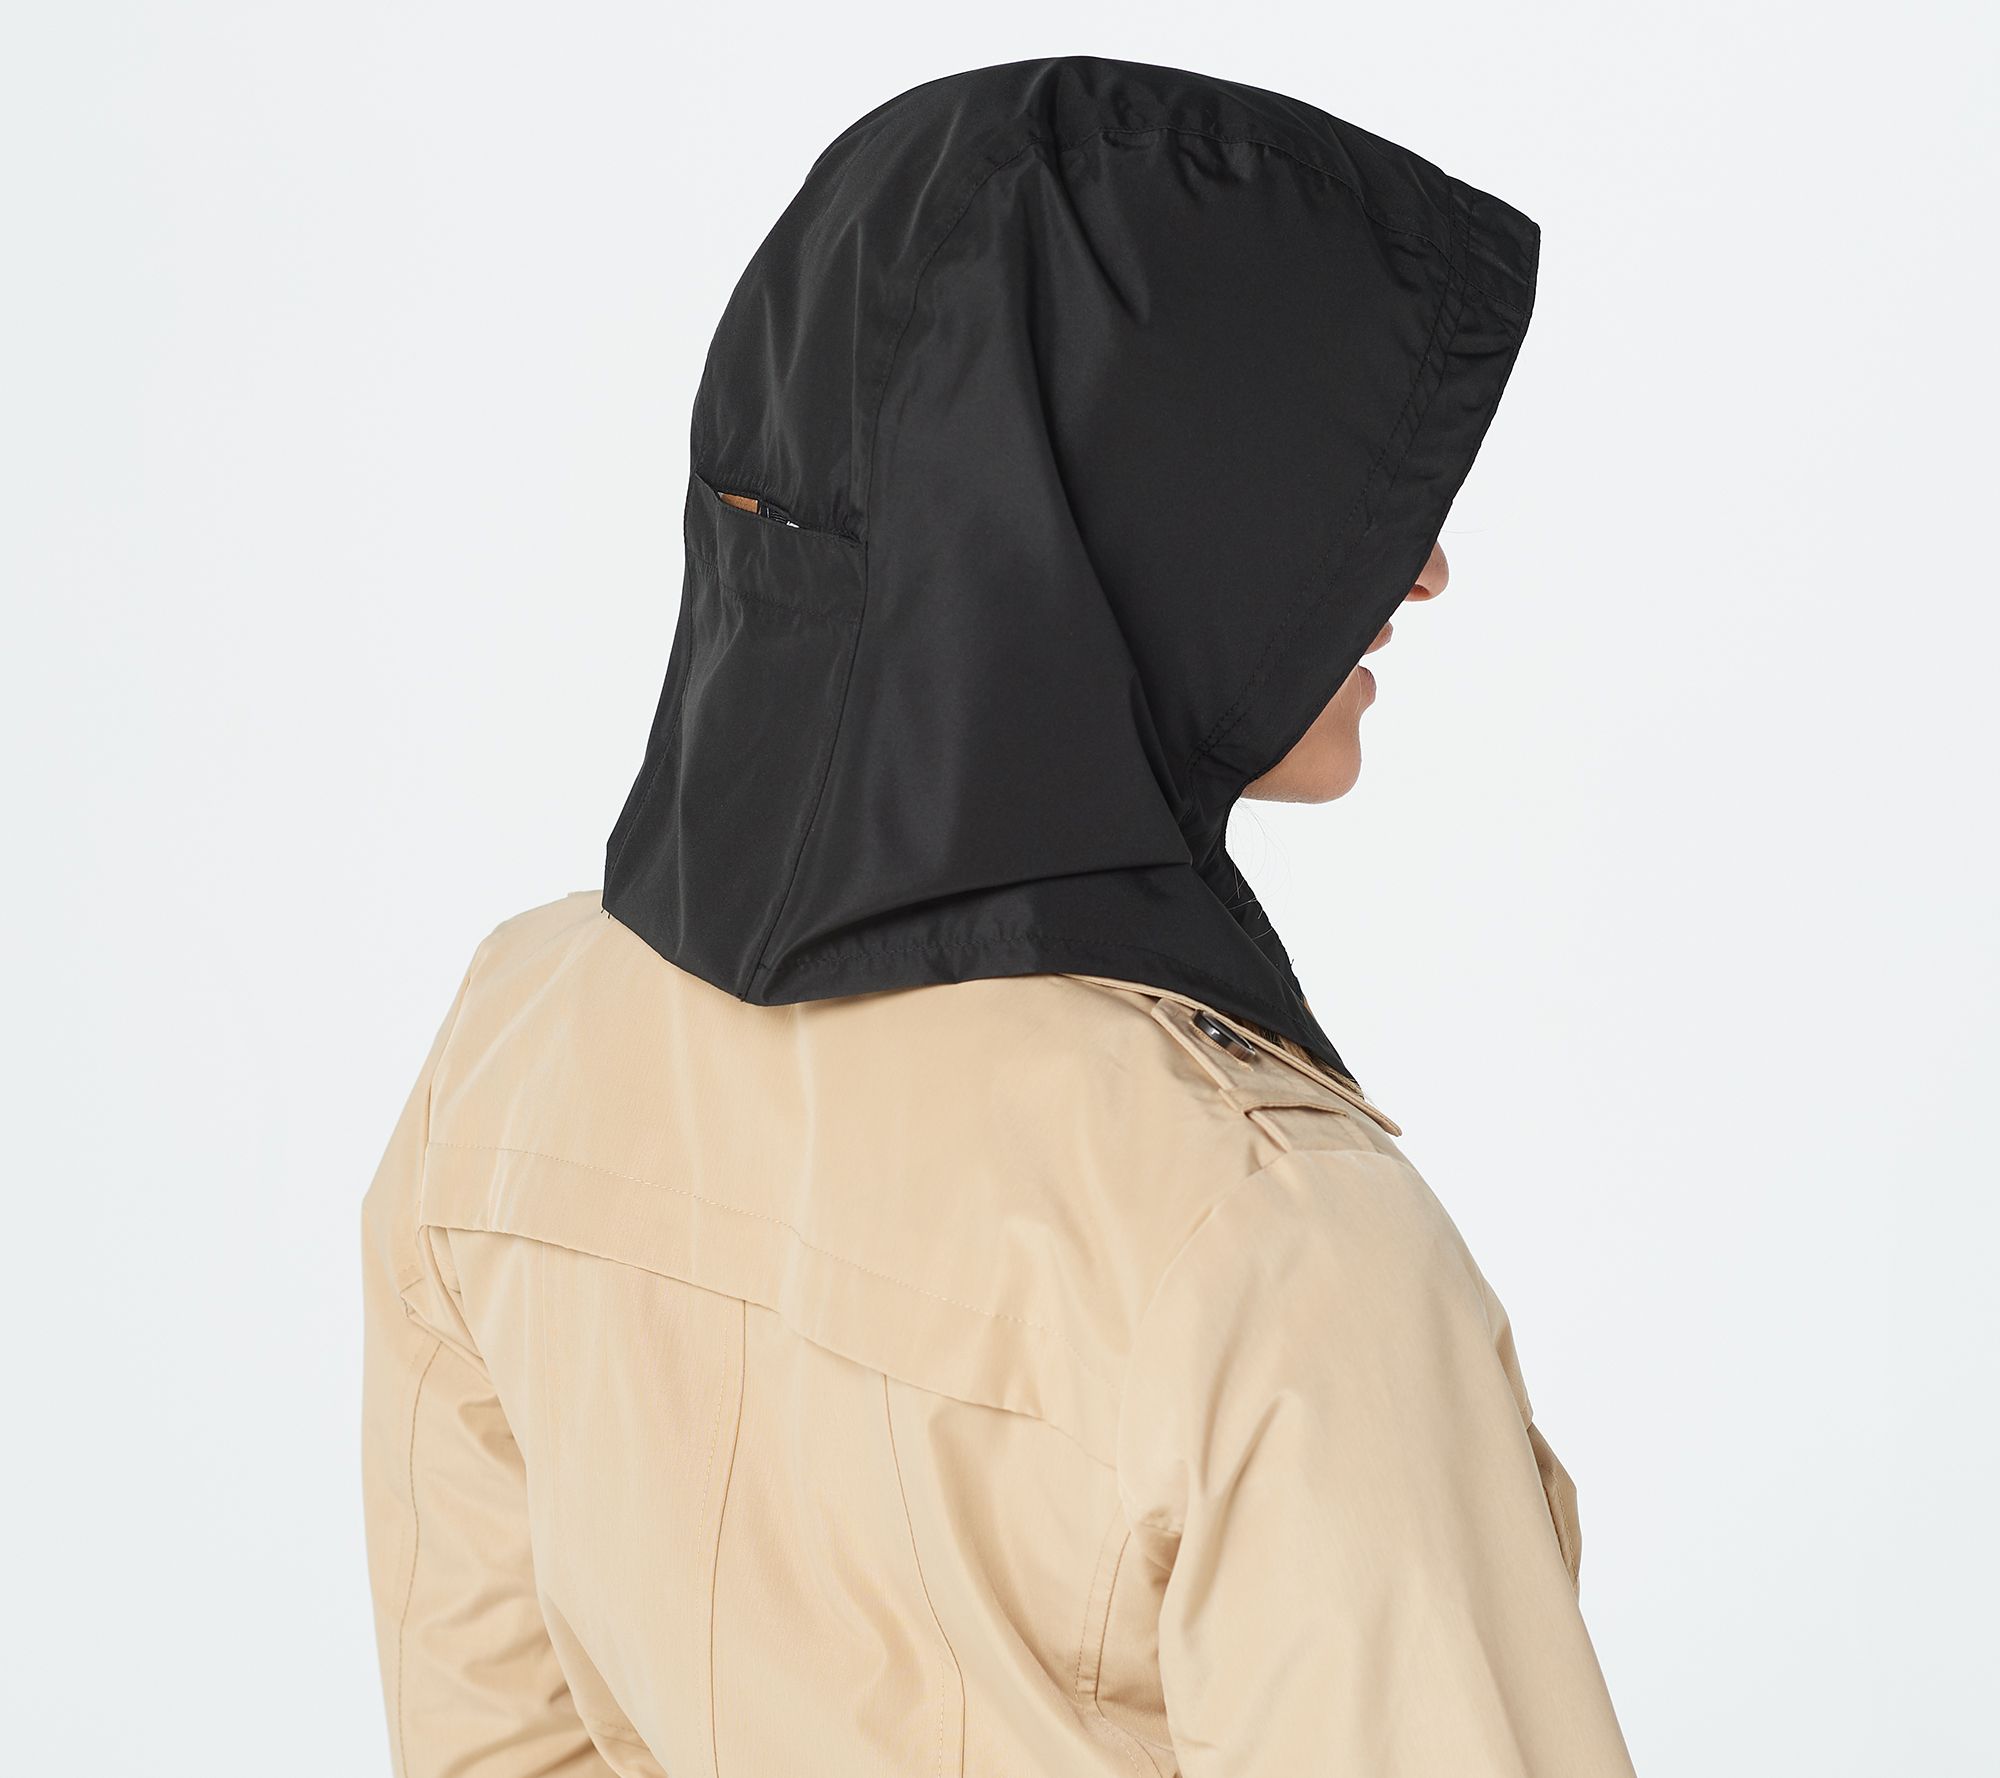 Rain Hood with Attached Chiffon Scarf by Sprigs - QVC.com